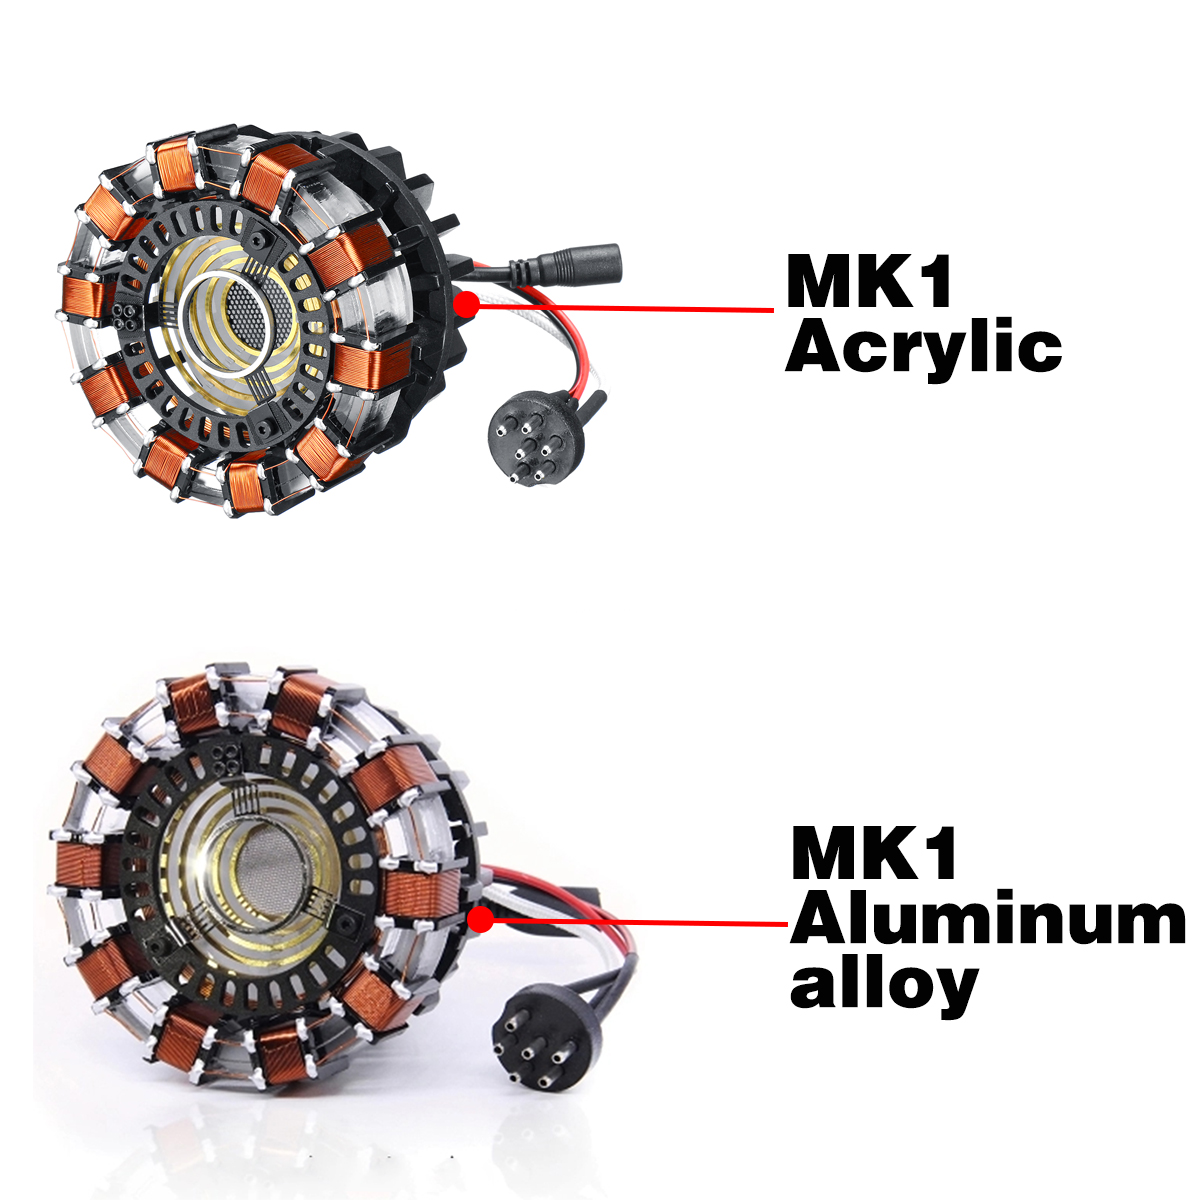 MK1 Aluminum Alloy Tony 1:1 Arc Reactor DIY Model Kit LED Chest Lamp USB Movie Props Gifts Science Toy 10